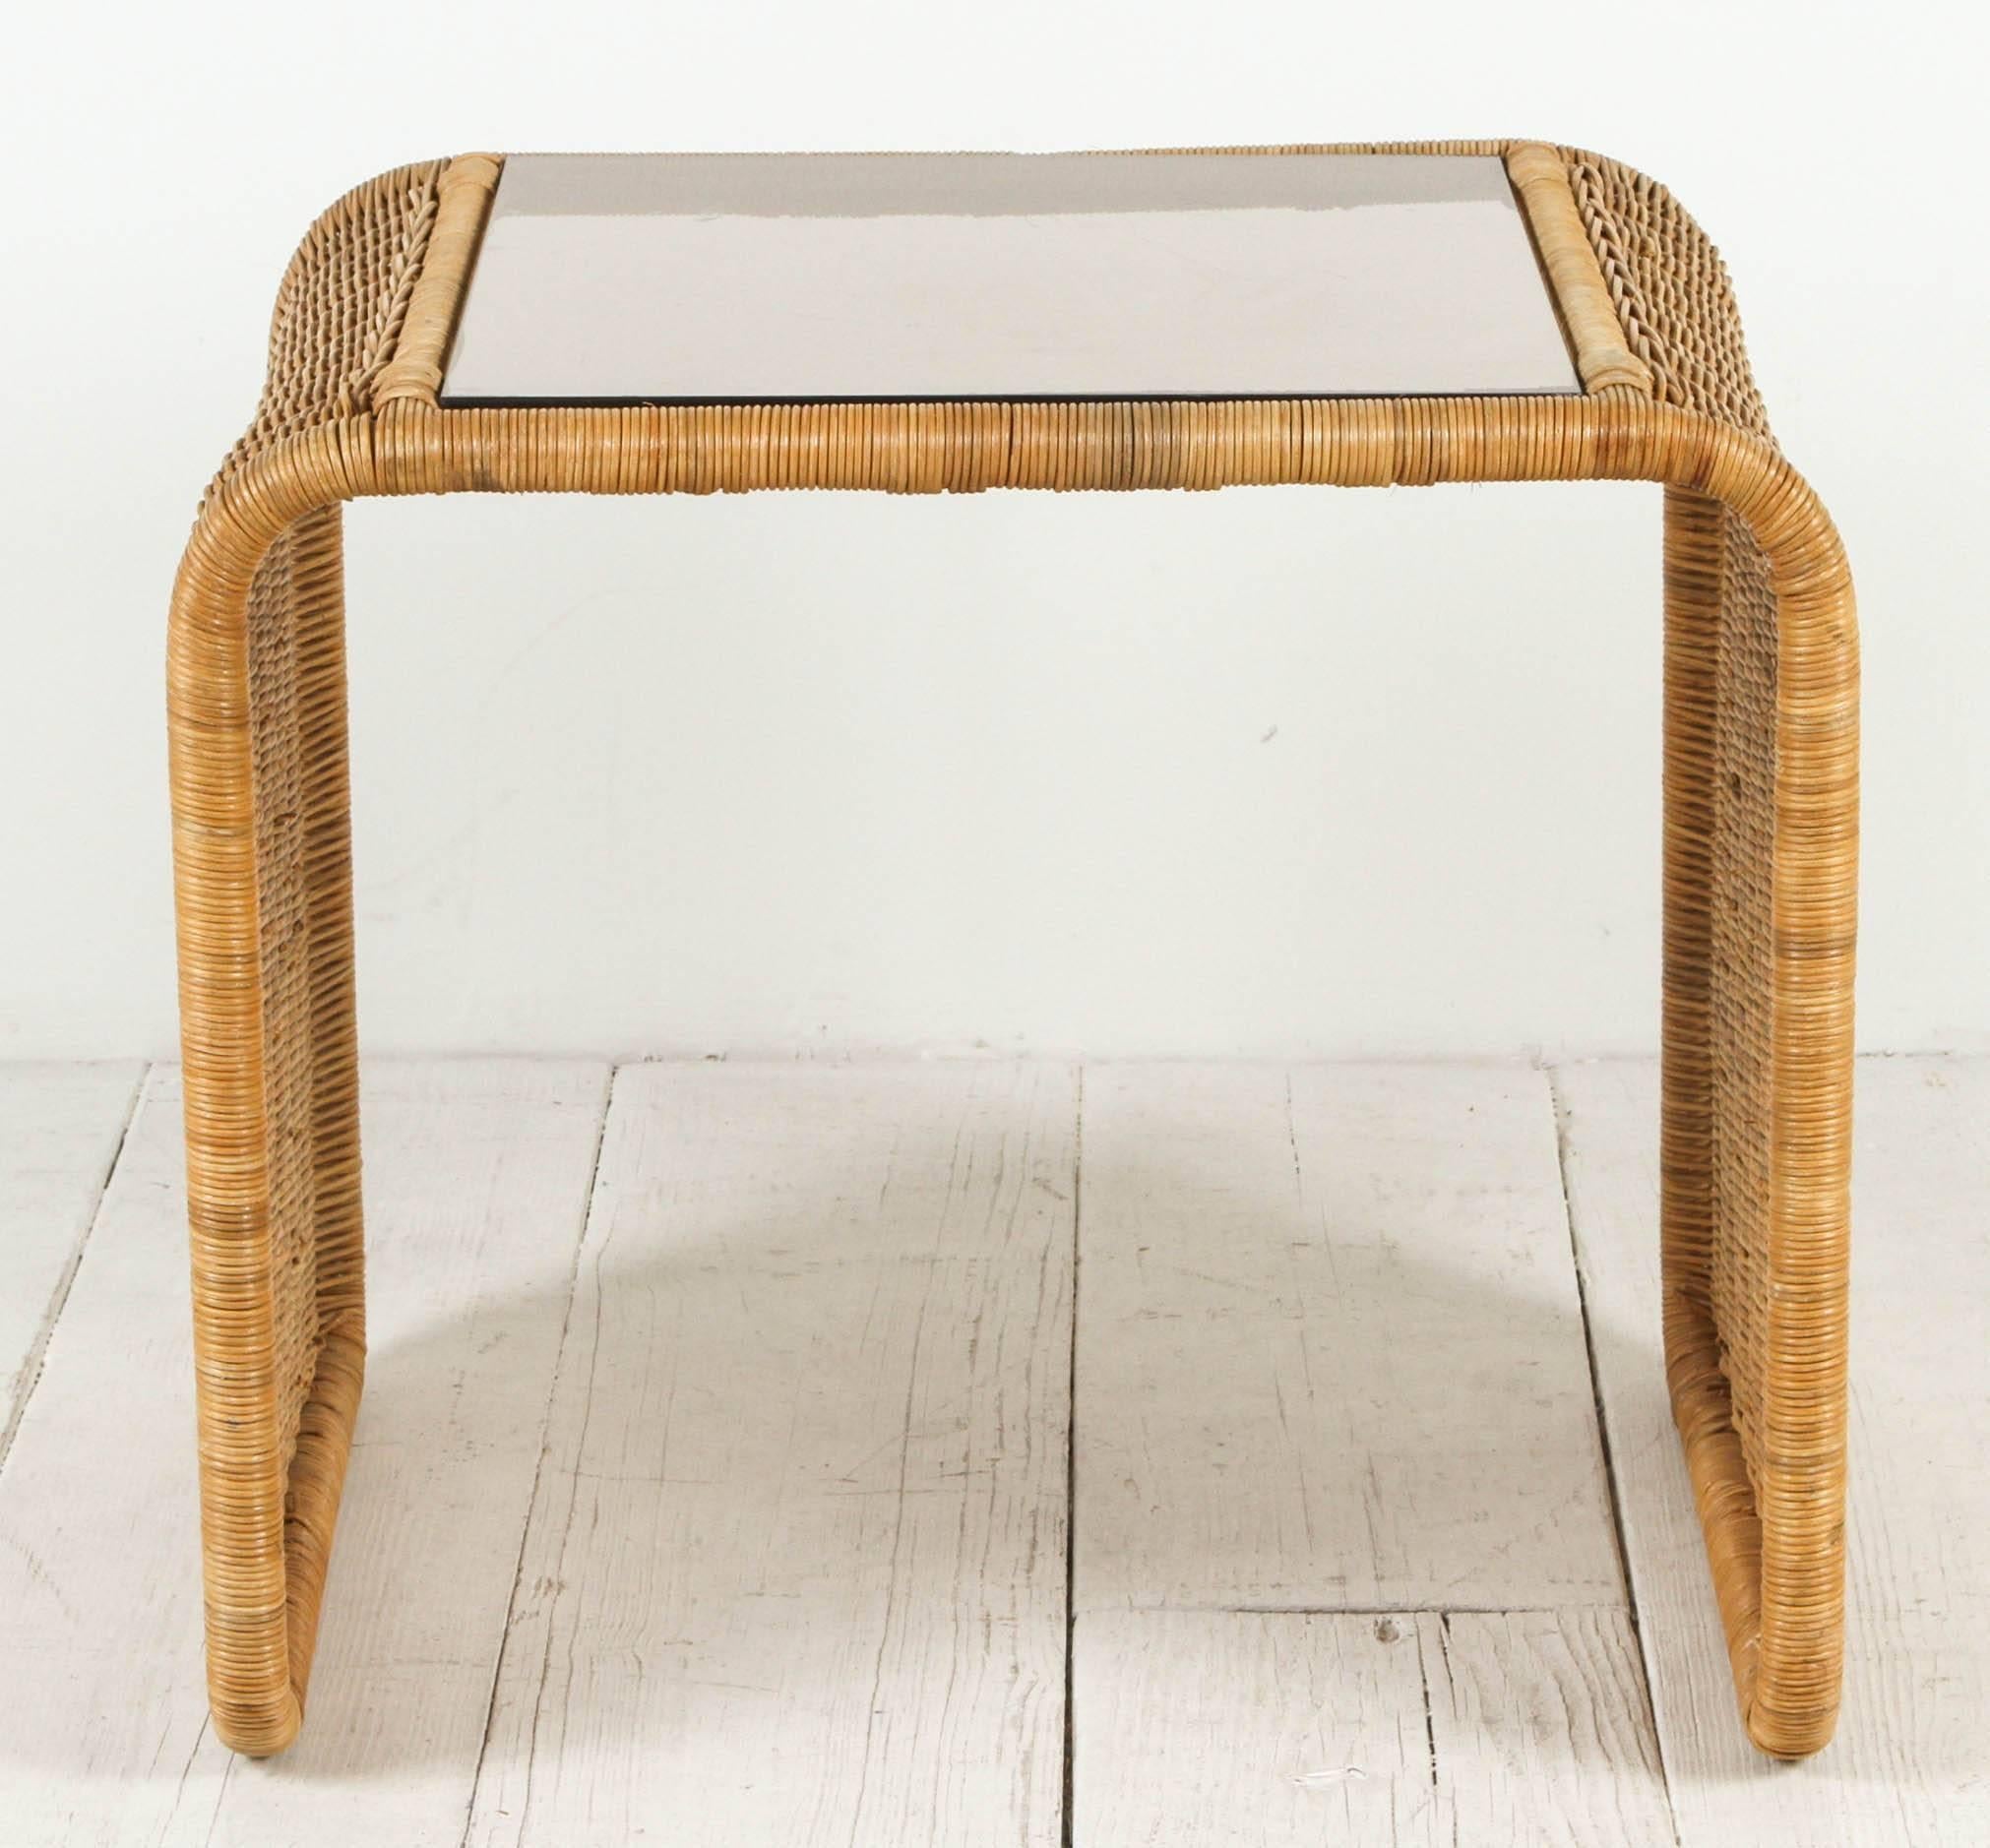 Vintage rattan and glass waterfall side table.